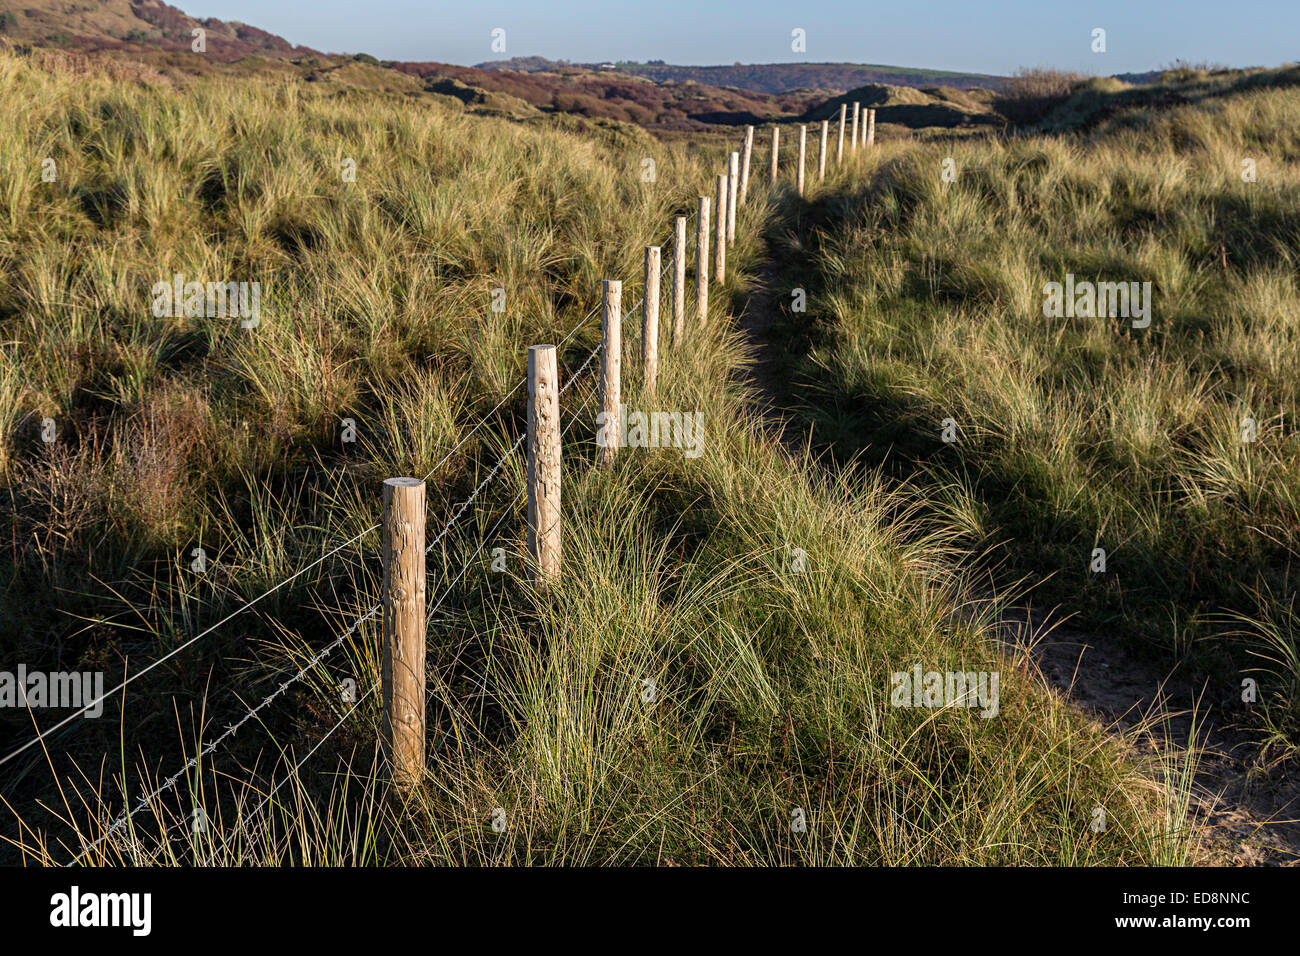 Fence to restrict cattle grazing on fixed dune habitat with marram grass, Merthyr Mawr, Wales, UK Stock Photo